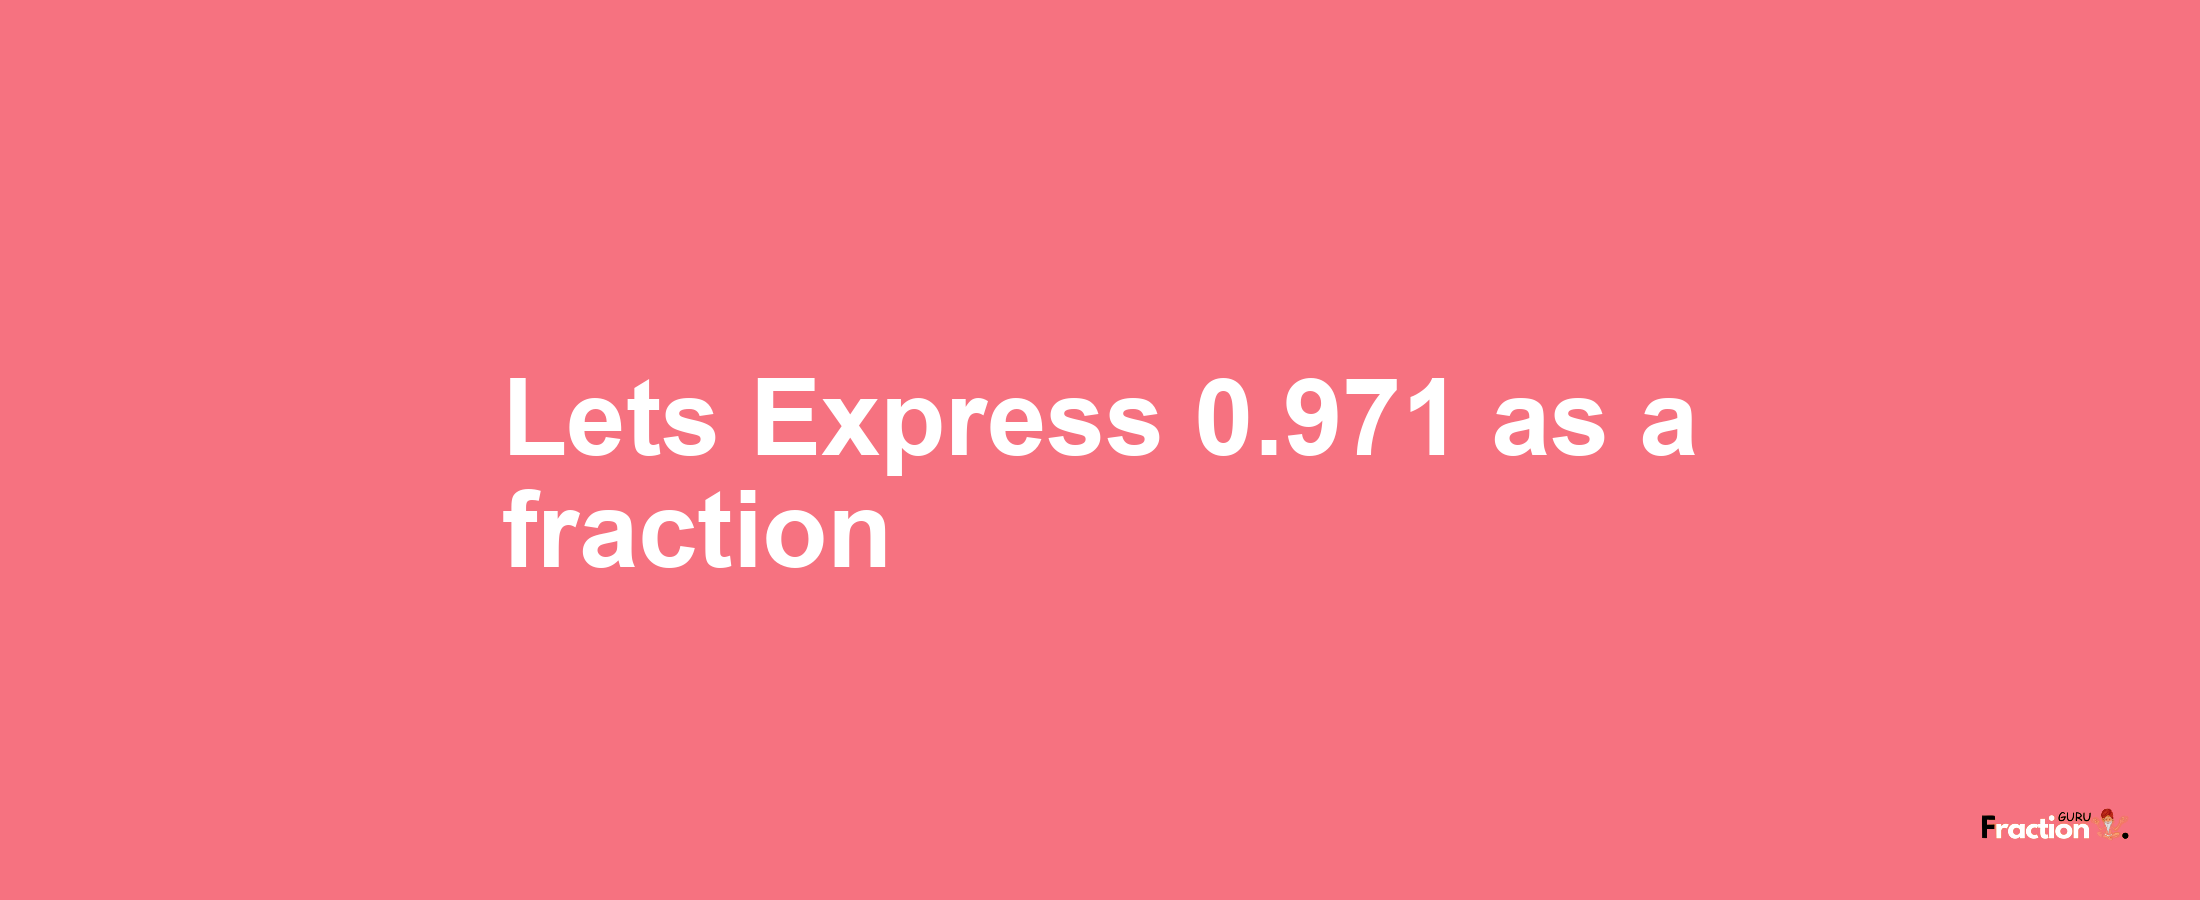 Lets Express 0.971 as afraction